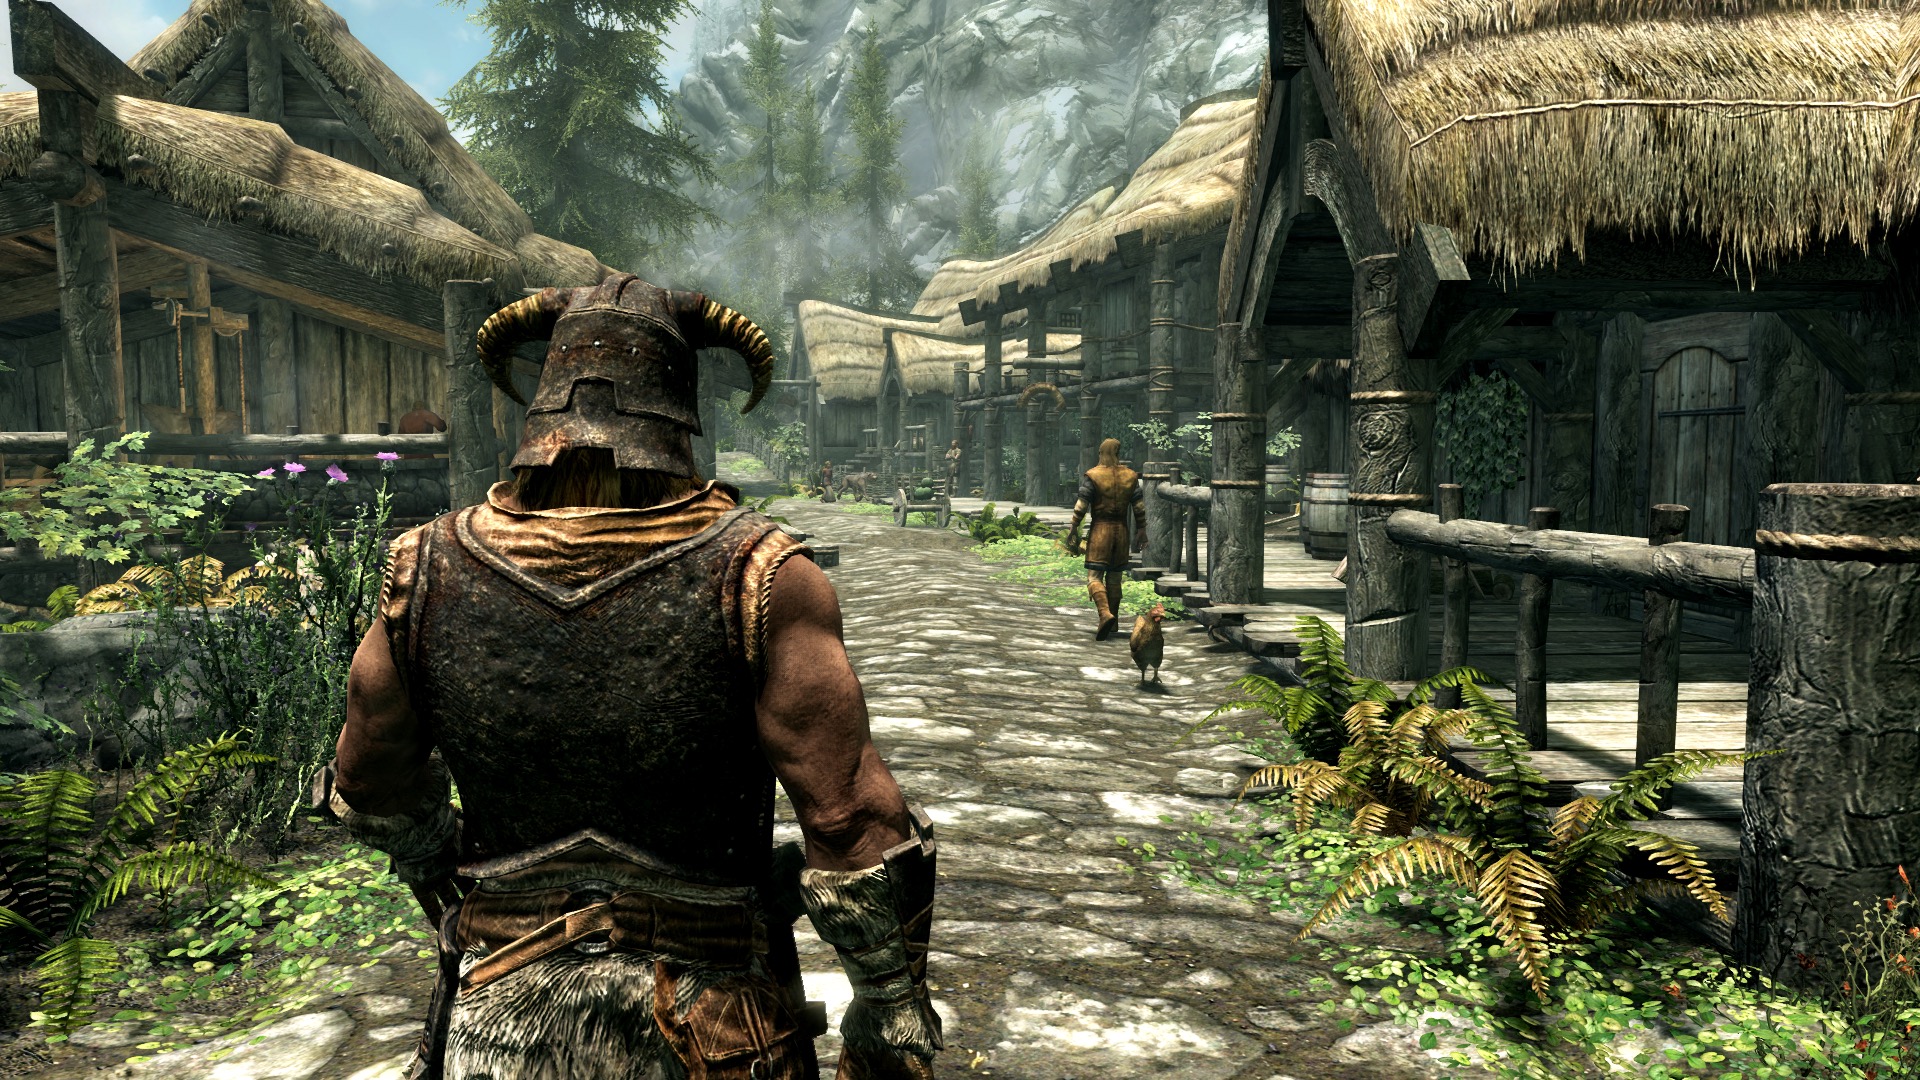 Skyrim Remaster Mods Space Limited to 1 GB on PS4, 5 GB on Xbox One -  GameSpot